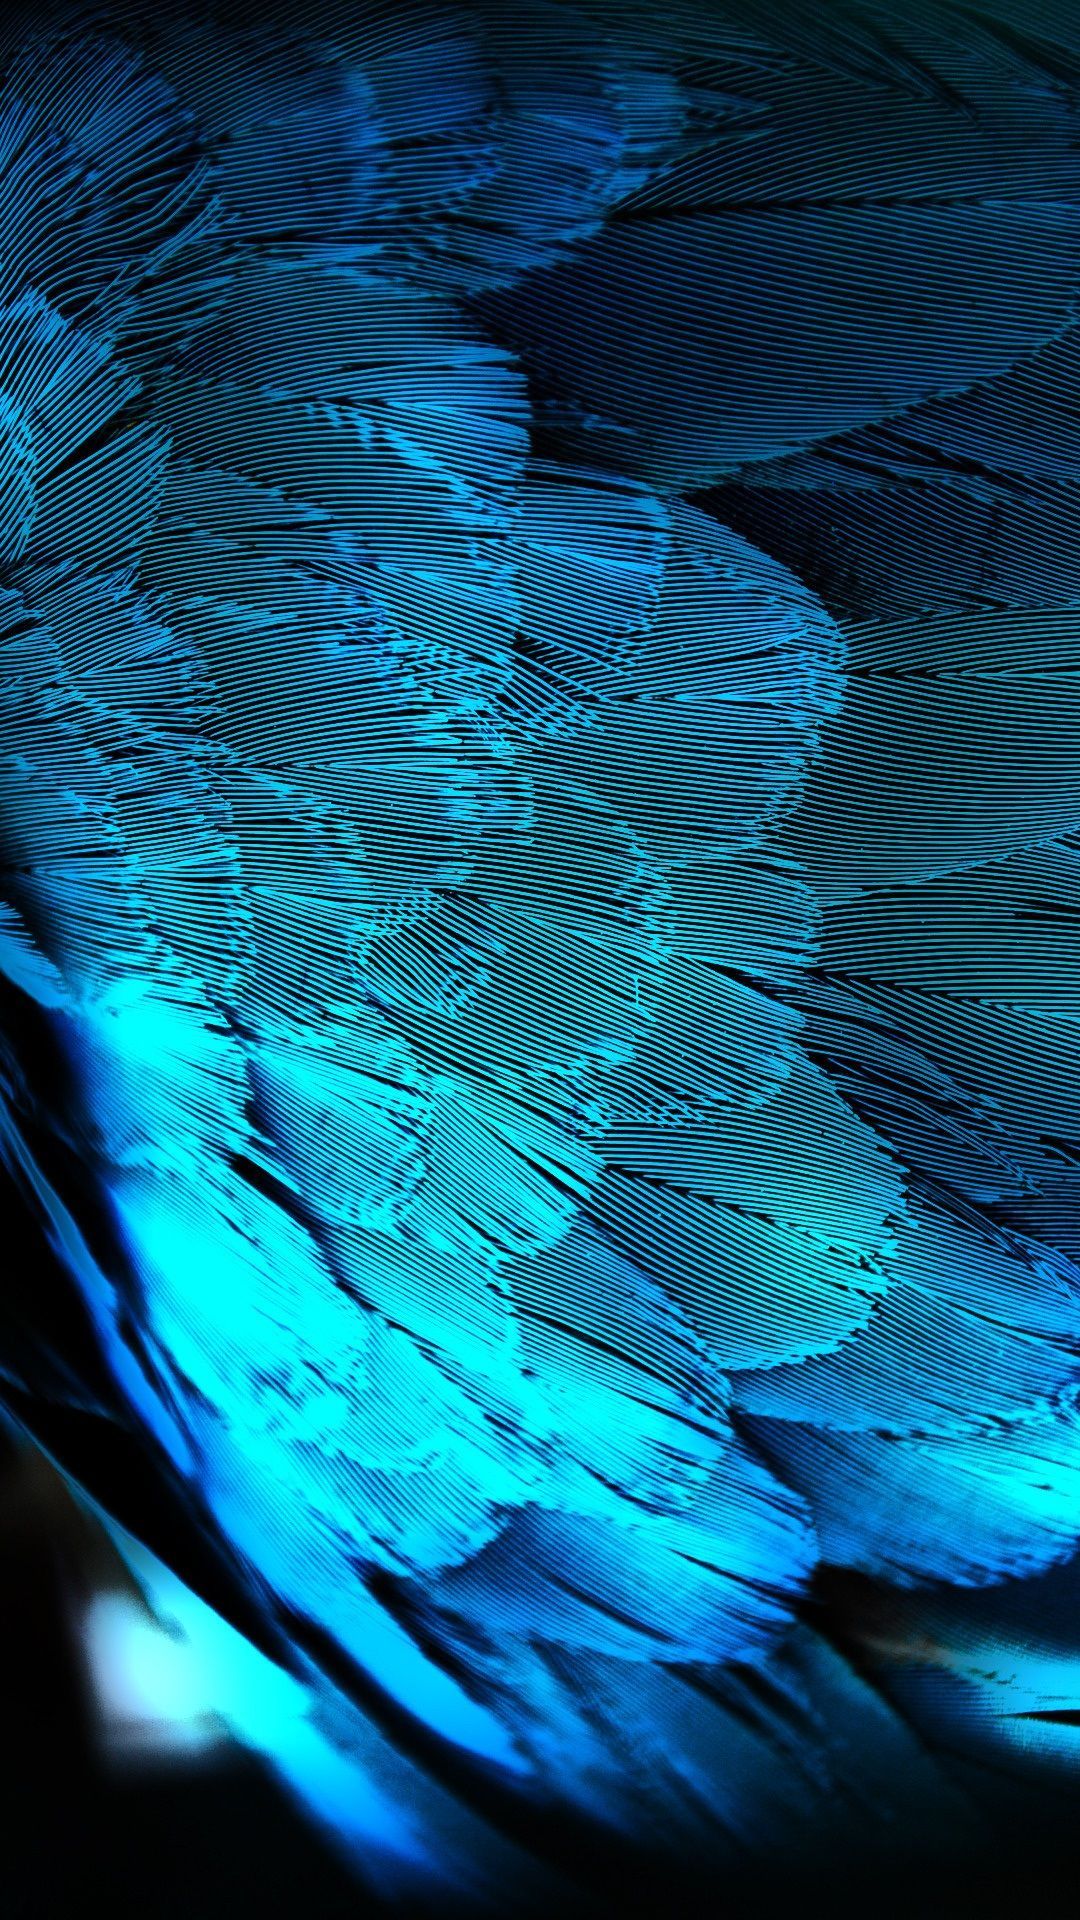 Blue Peacock Feathers. Ios 11 wallpaper, Android wallpaper